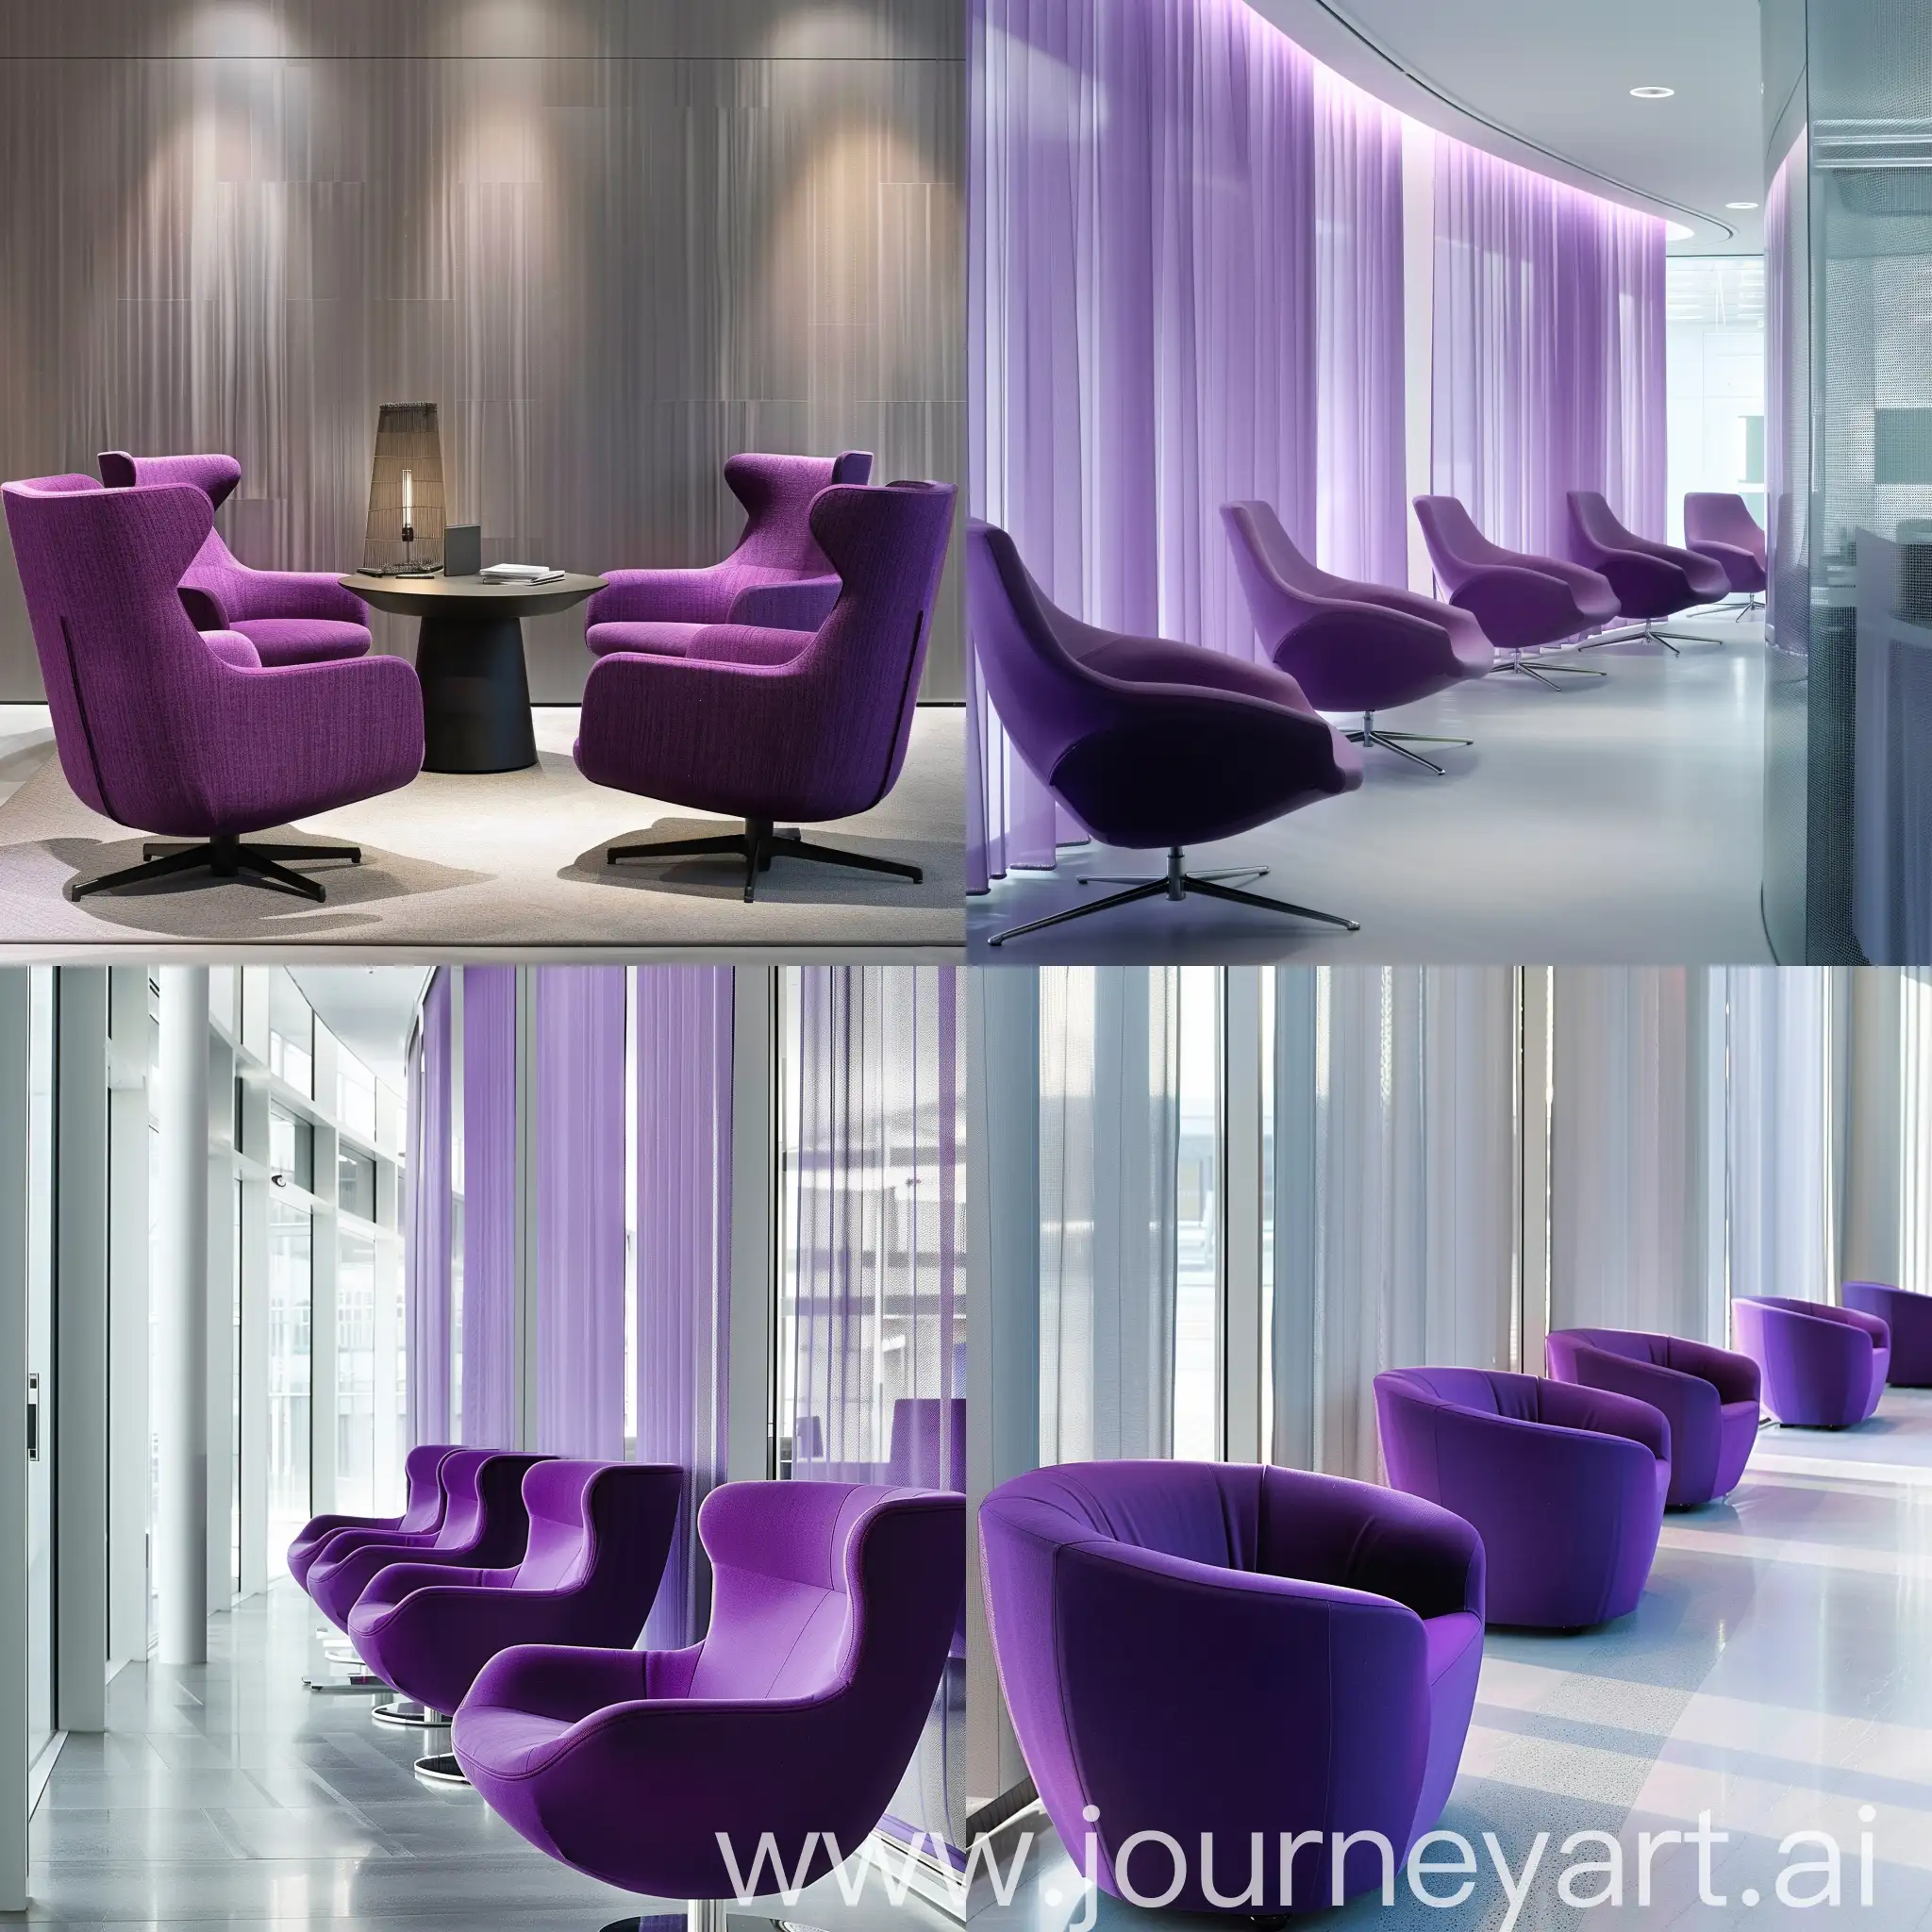 design waiting area, administrative office, reductionism design, simplicity and purity, fabric, purple colour.